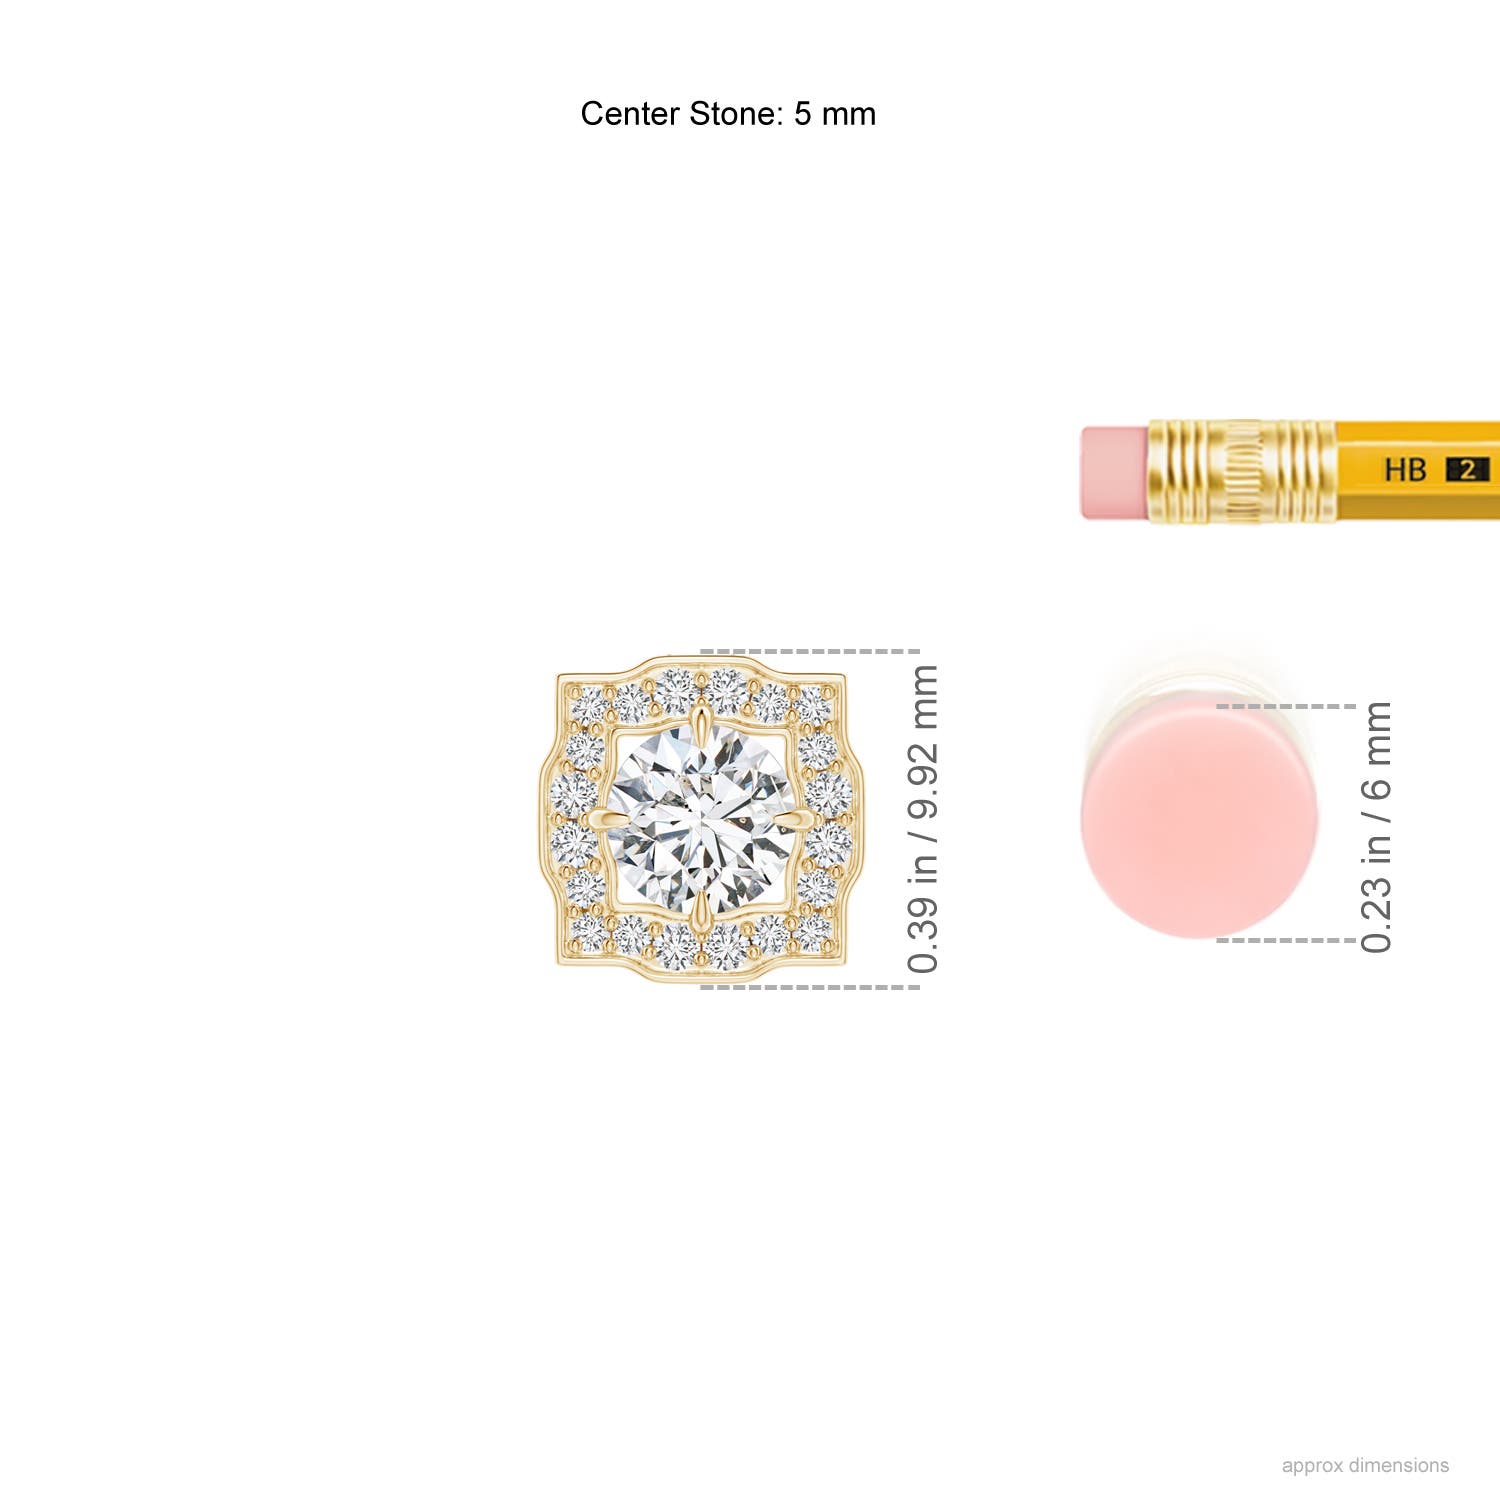 H, SI2 / 0.62 CT / 14 KT Yellow Gold